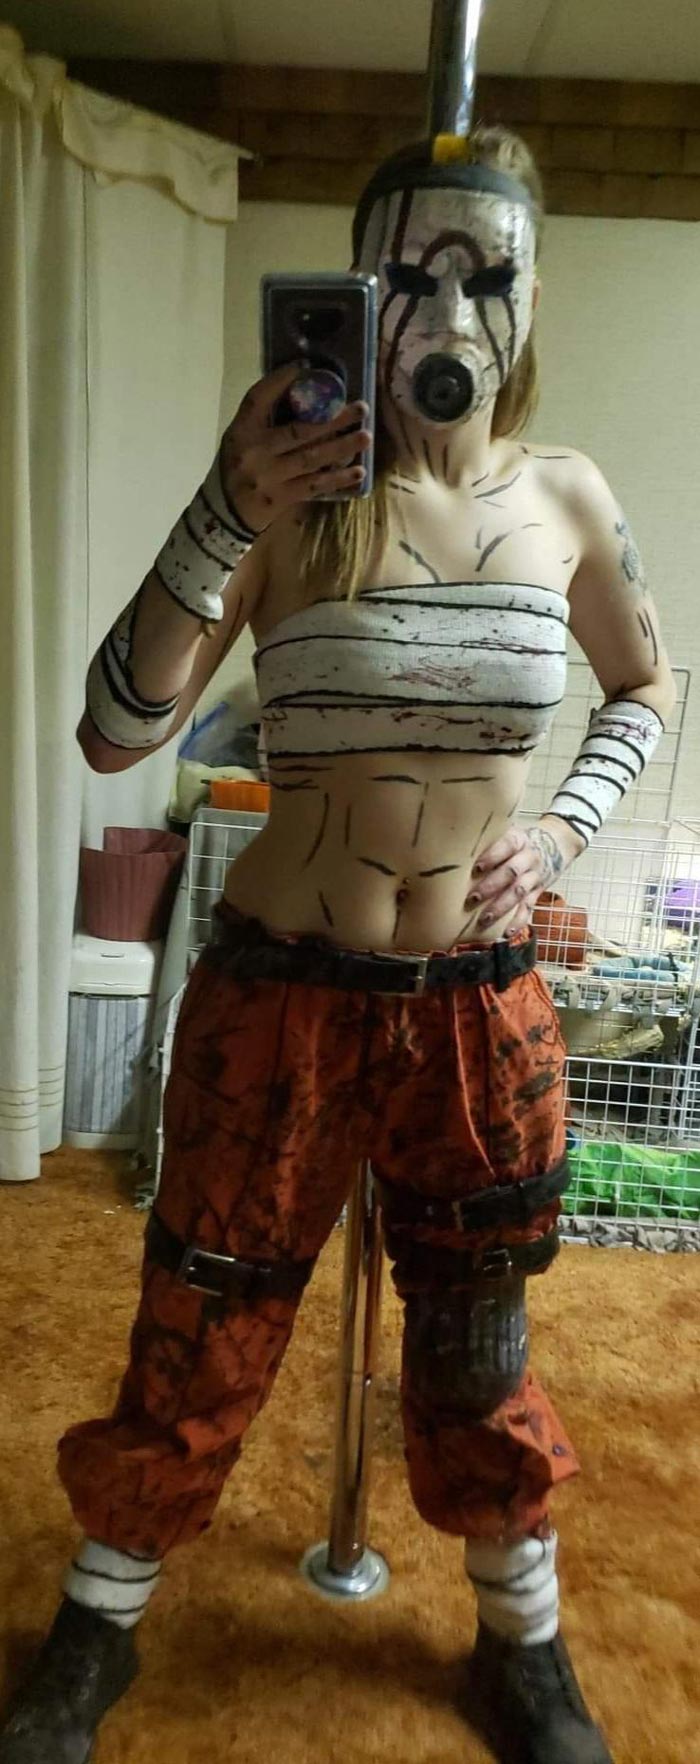 My Borderlands Psycho costume. "LOVE ME! HATE ME! IT ALL TASTES THE SAME!"